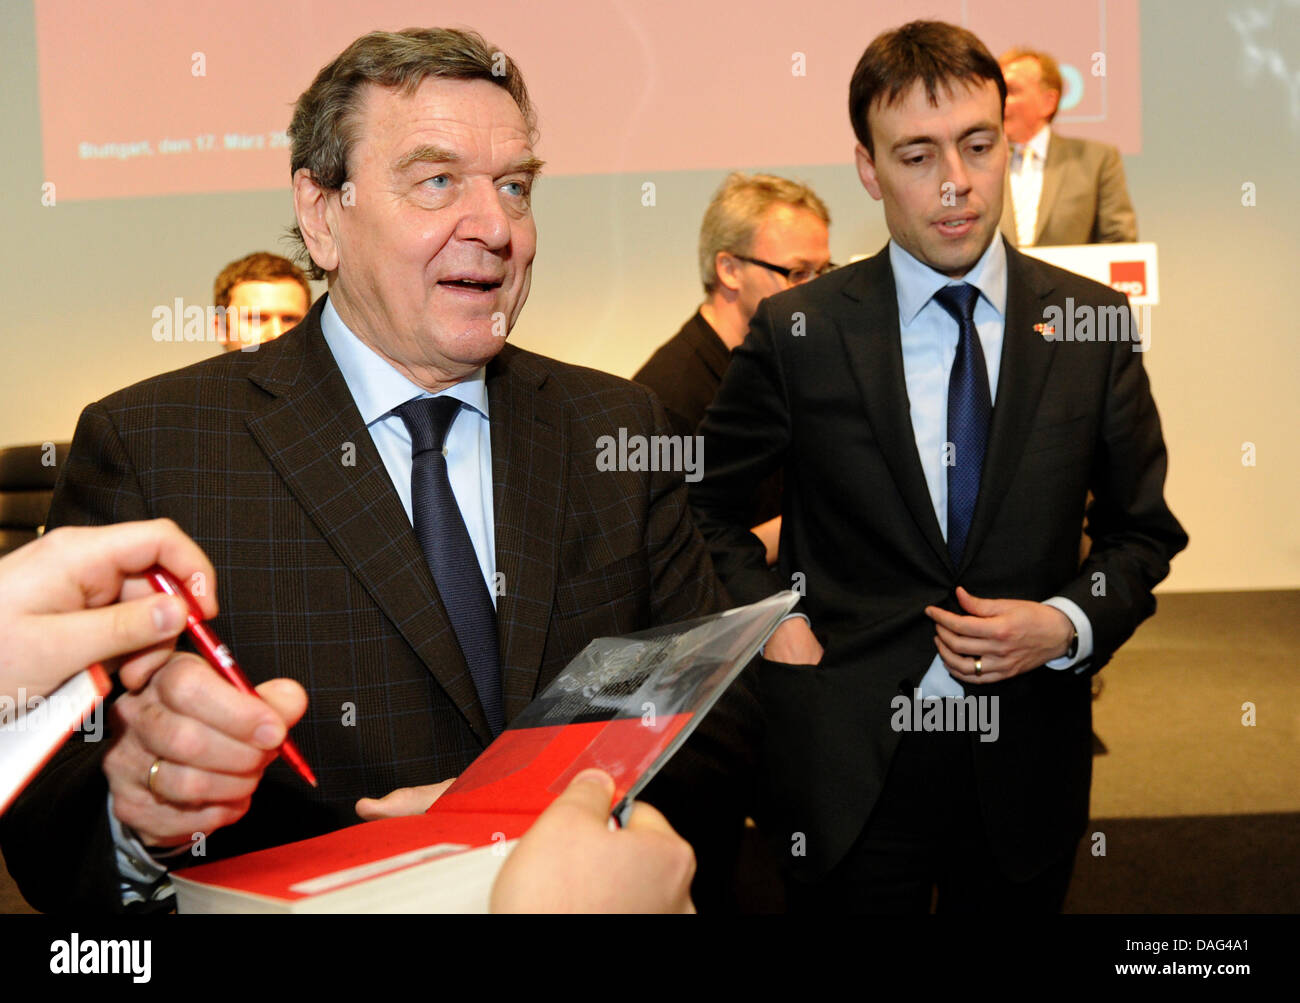 Former German Chancellor Gerhard Schroeder (L-R) signs autographs next to SPD-top candidate for Baden Wuerttemberg's state election Nils Schmid at the Porsche Museum in Stuttgart, Germany, 17 March 2011. Schroeder visited an event of the Social Democratic Party with the title 'New Agenda for Baden-Wuerttemberg'. Photo: Marijan Murat Stock Photo